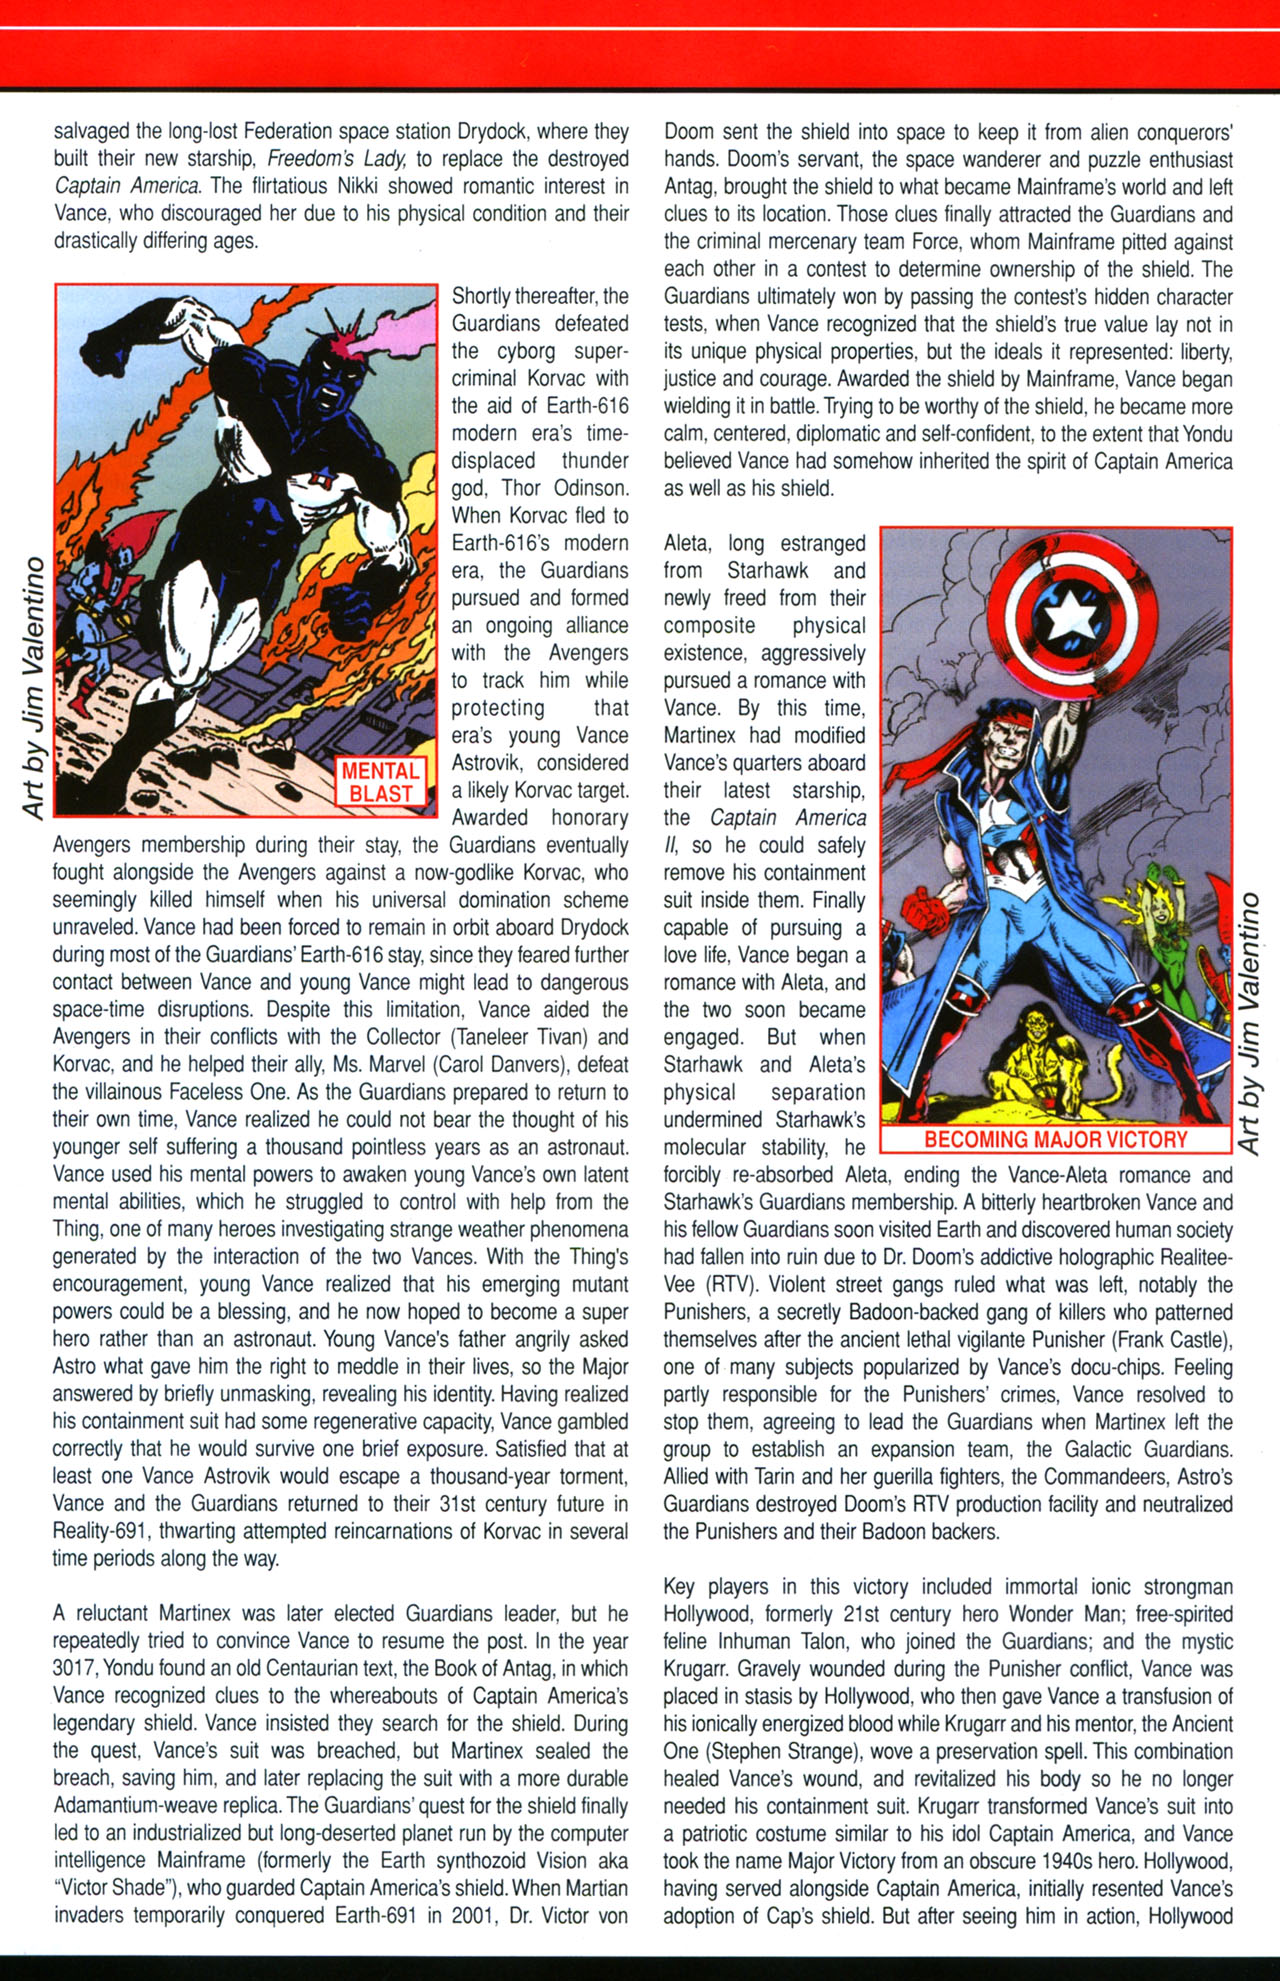 Read online Official Handbook of the Marvel Universe A To Z Update comic -  Issue #5 - 30